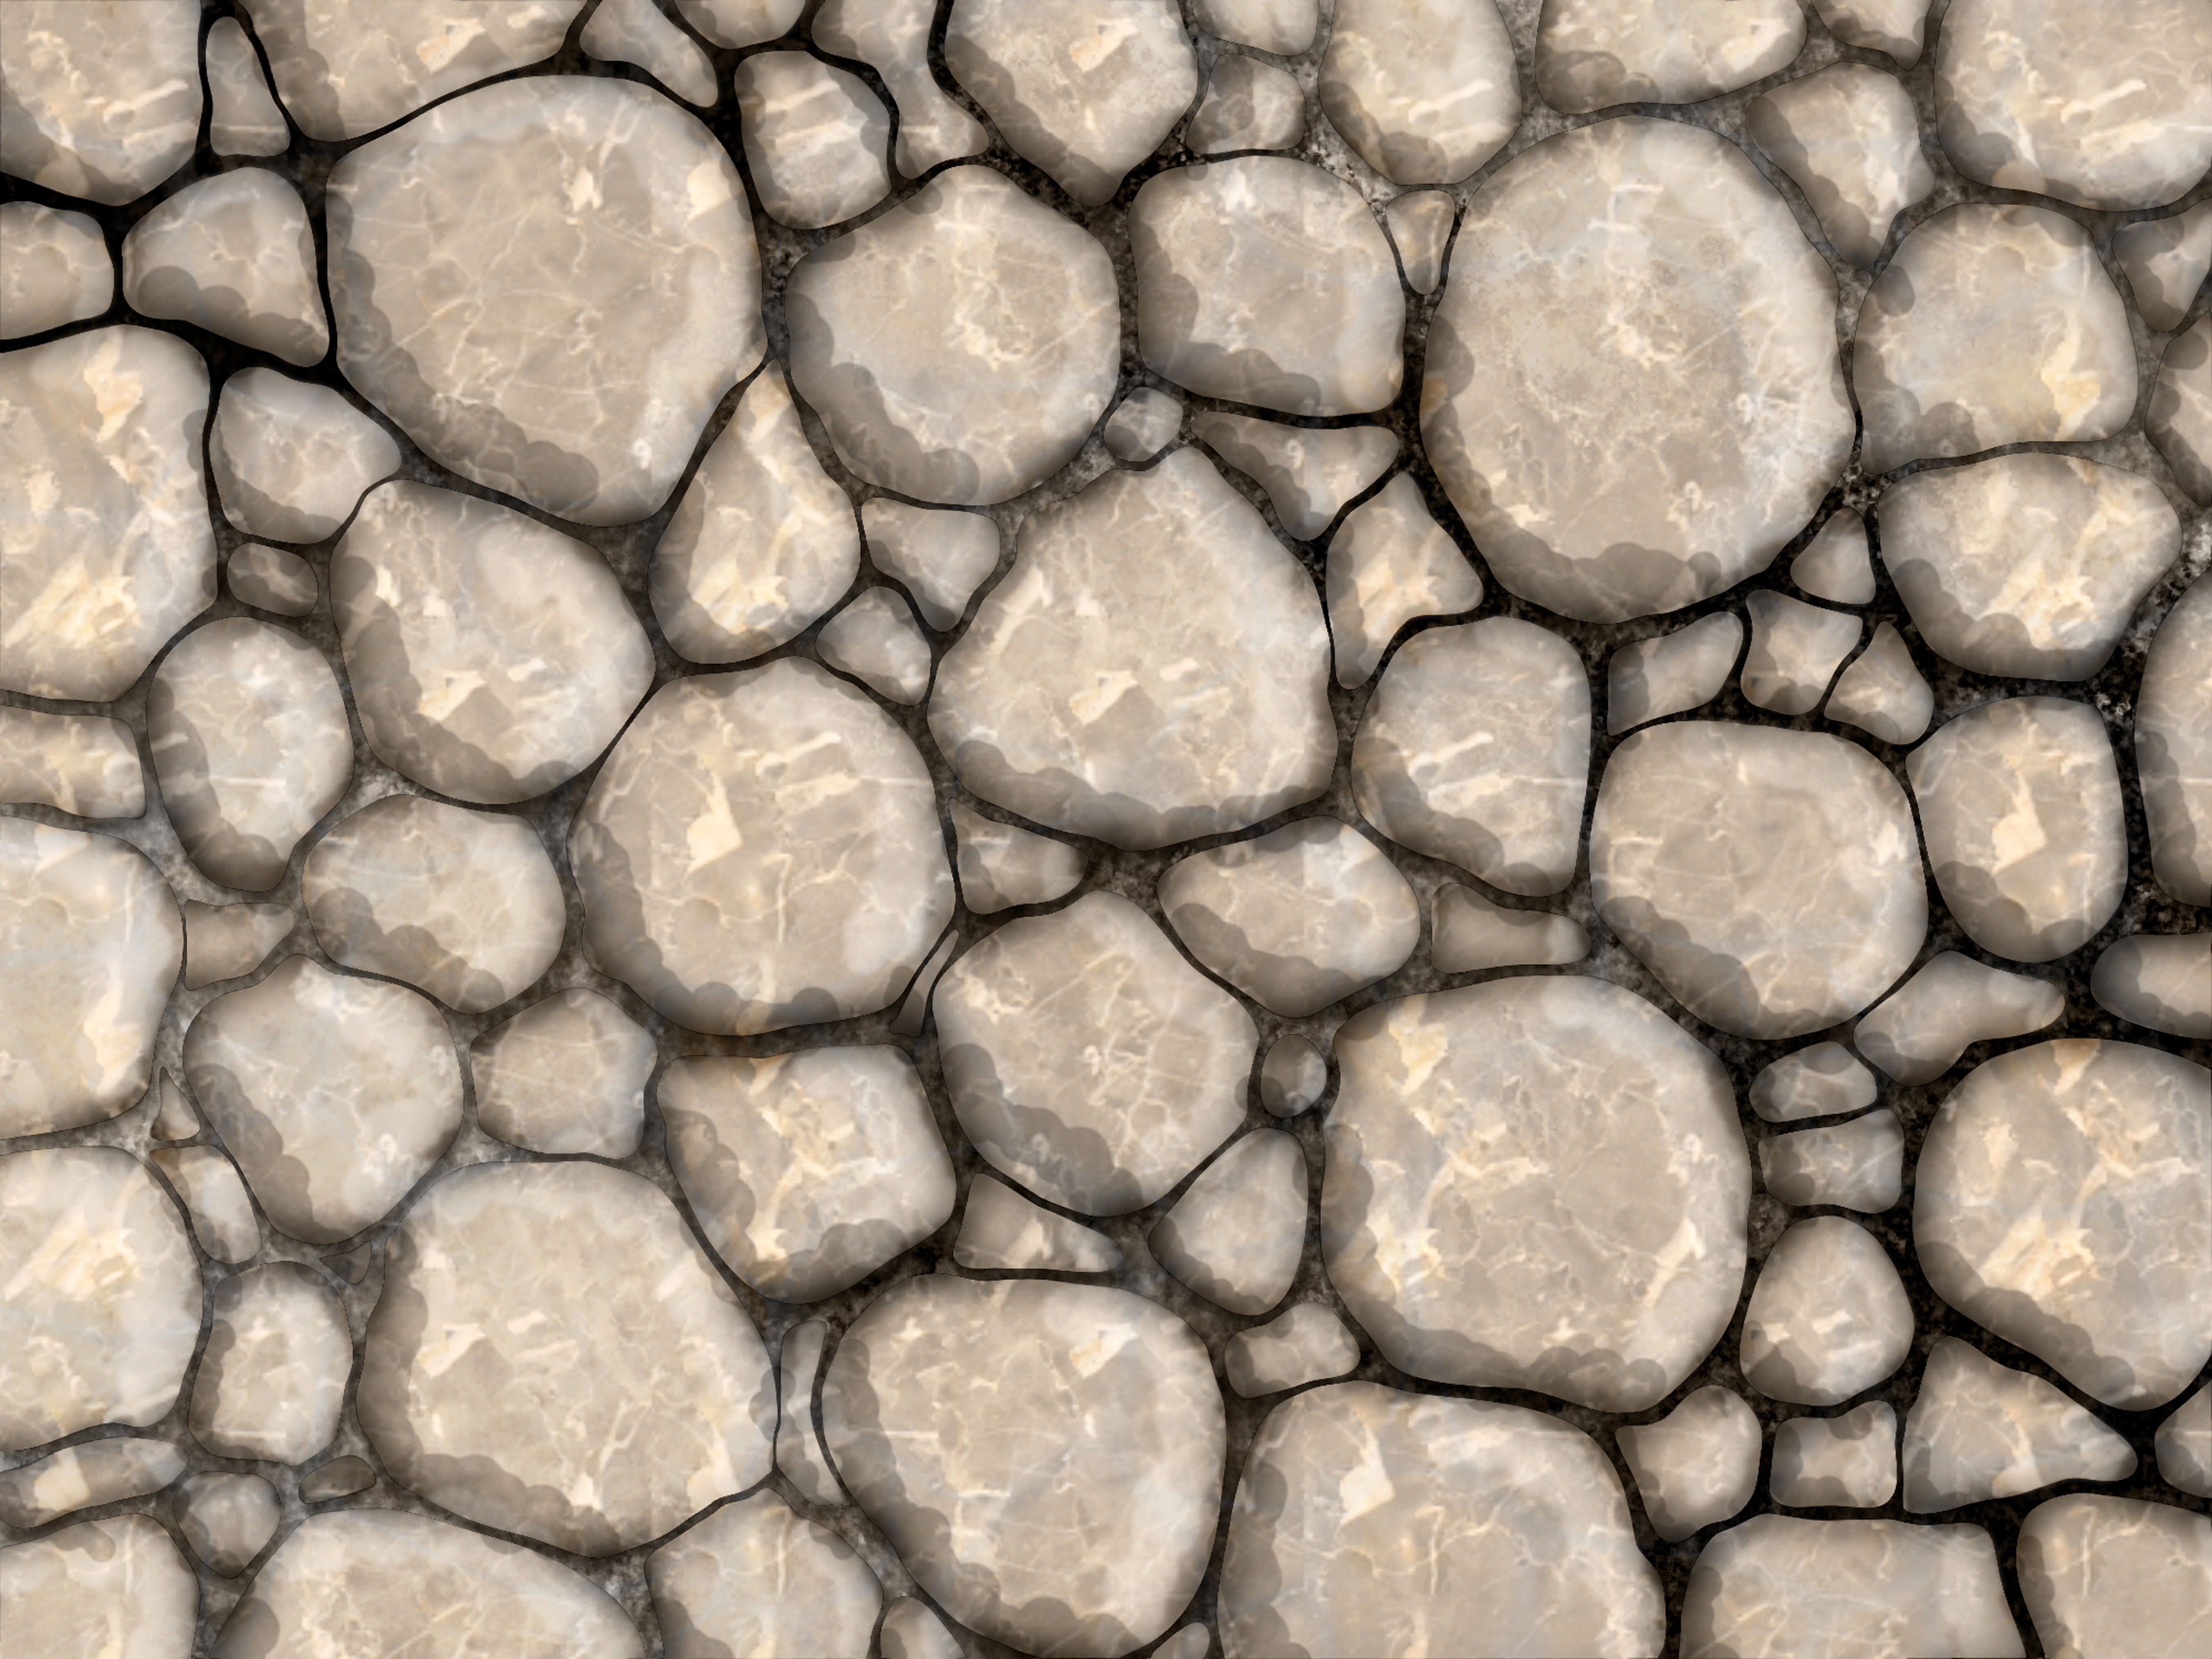 Stone wall texture clipart 20 free Cliparts | Download images on